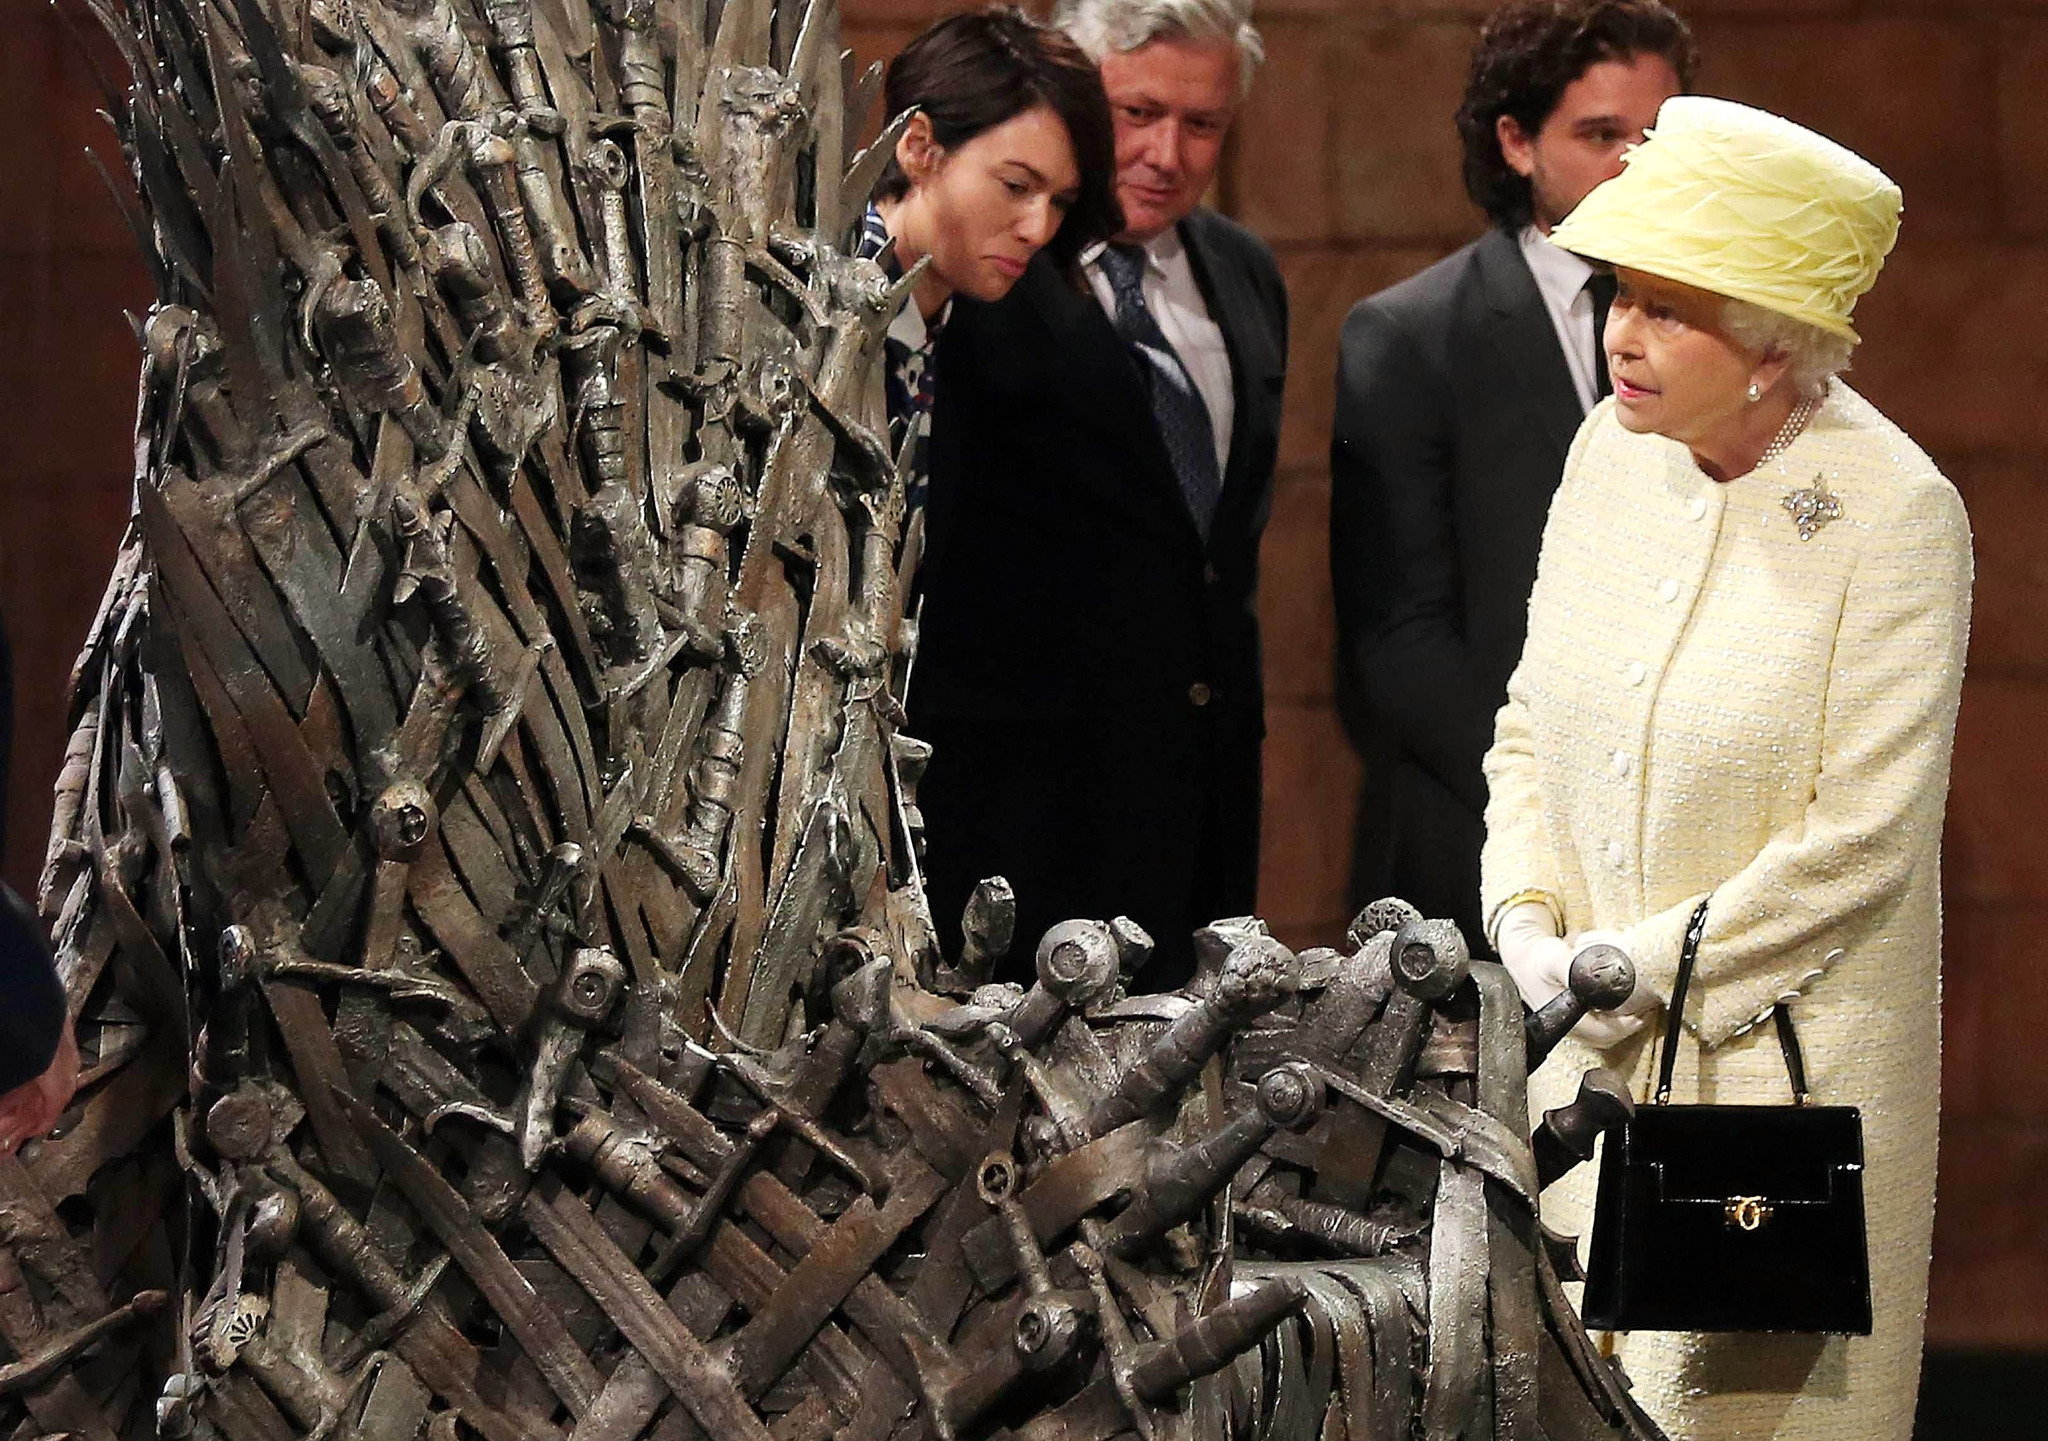 Queen Elizabeth II meets cast members of the HBO TV series 'Game of Thrones' Lena Headey and Conleth Hill as she views some of the props including the Iron Throne on set in Belfast's Titanic Quarter on June 24, 2014 in Belfast, Northern Ireland.